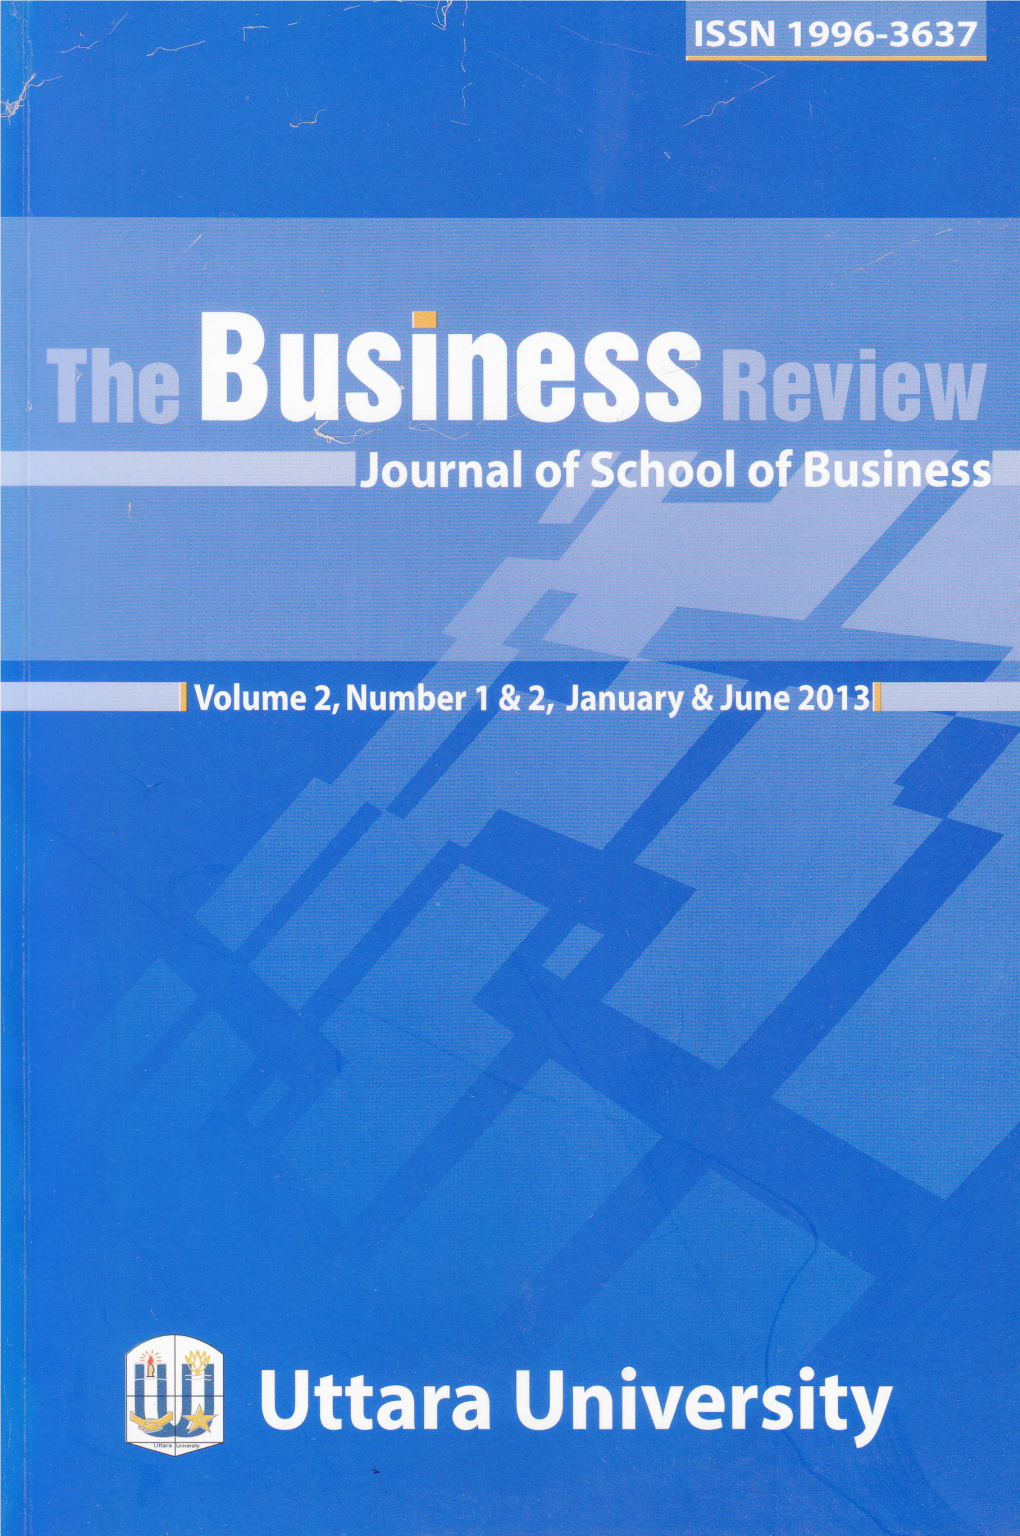 The Busines Review